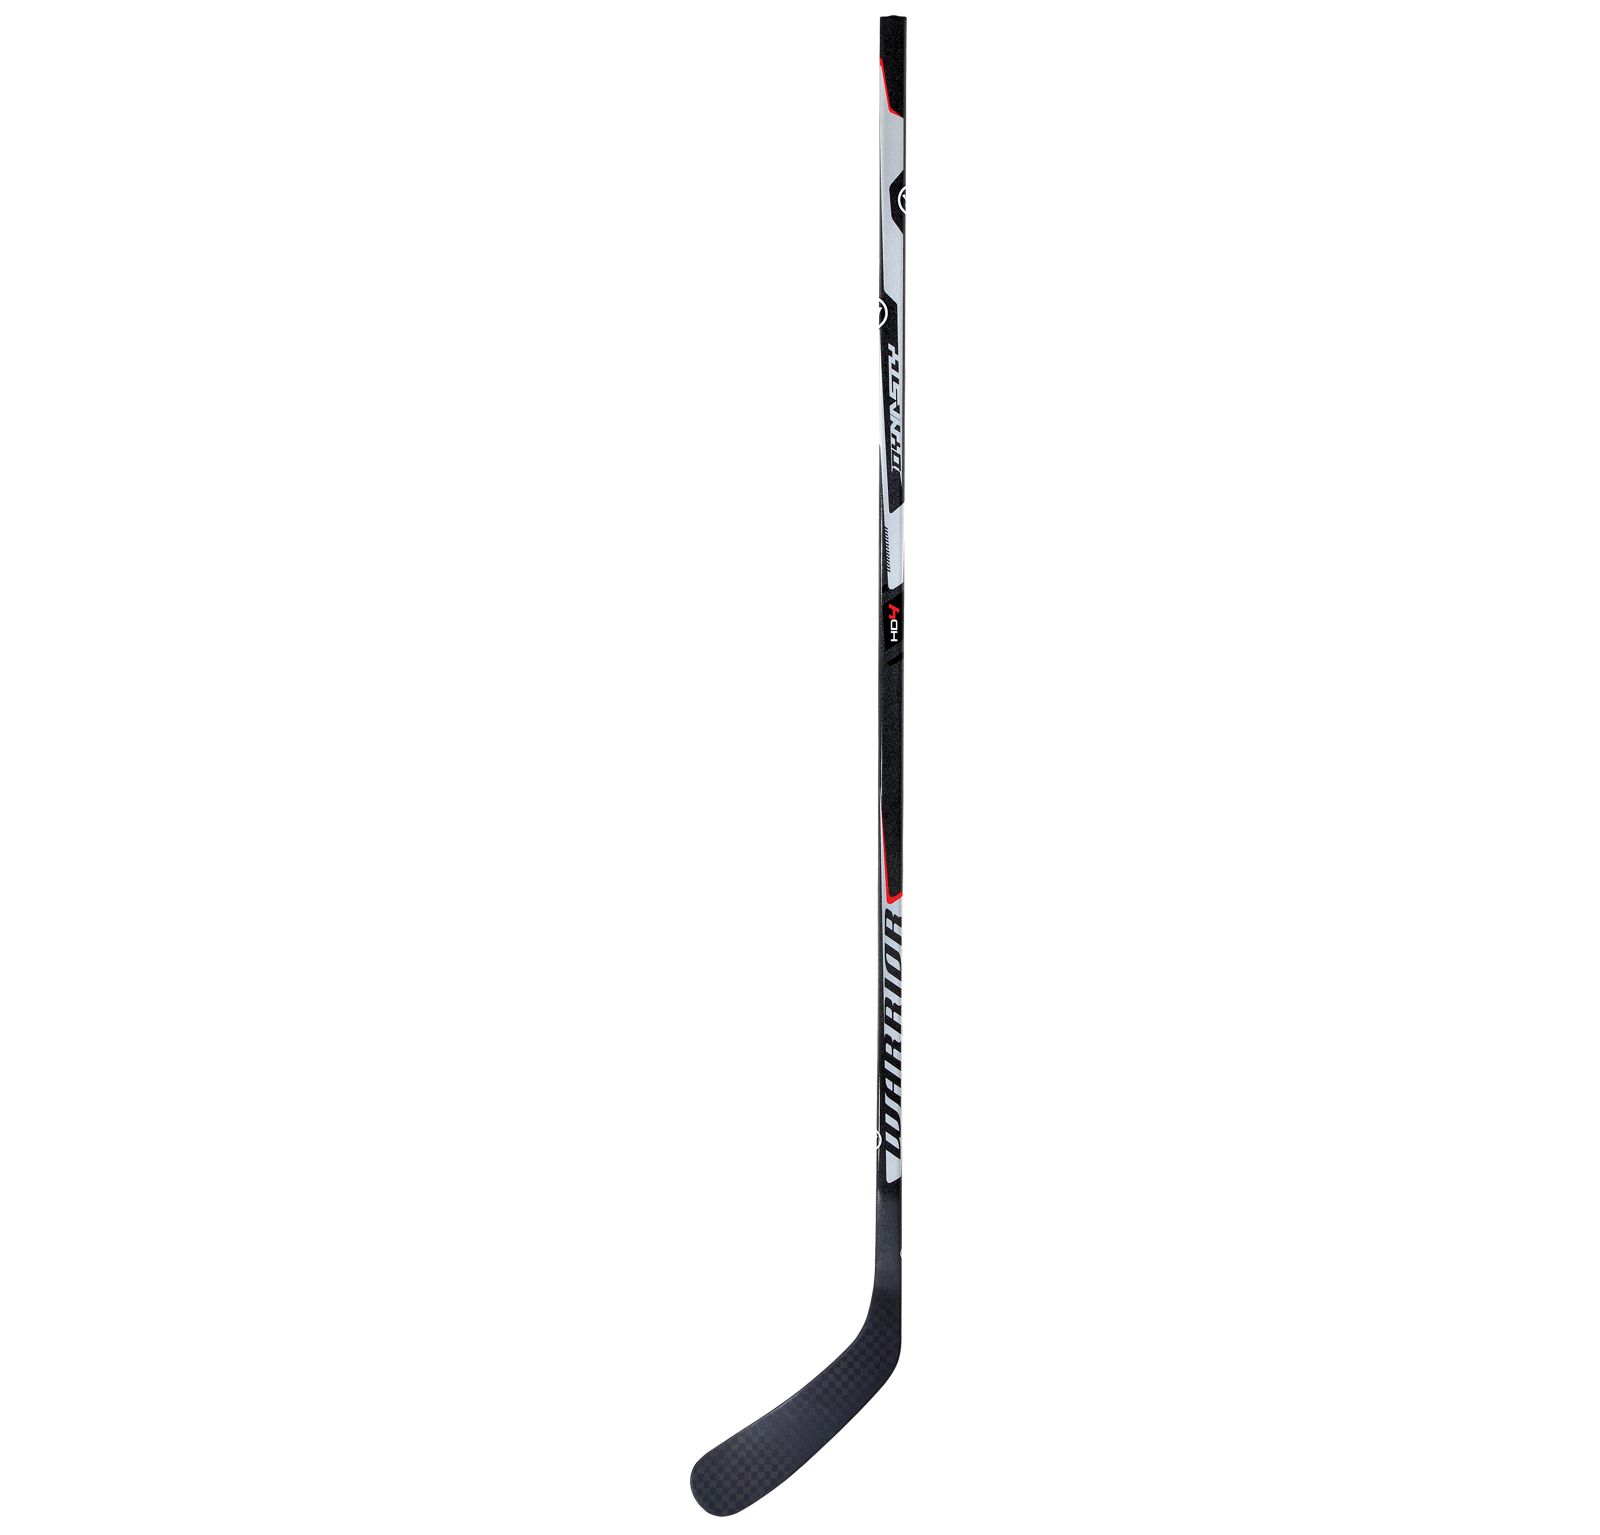 DYNASTY HD4 SENIOR GRIP HOCKEY STICK, Black with White & Red image number 0